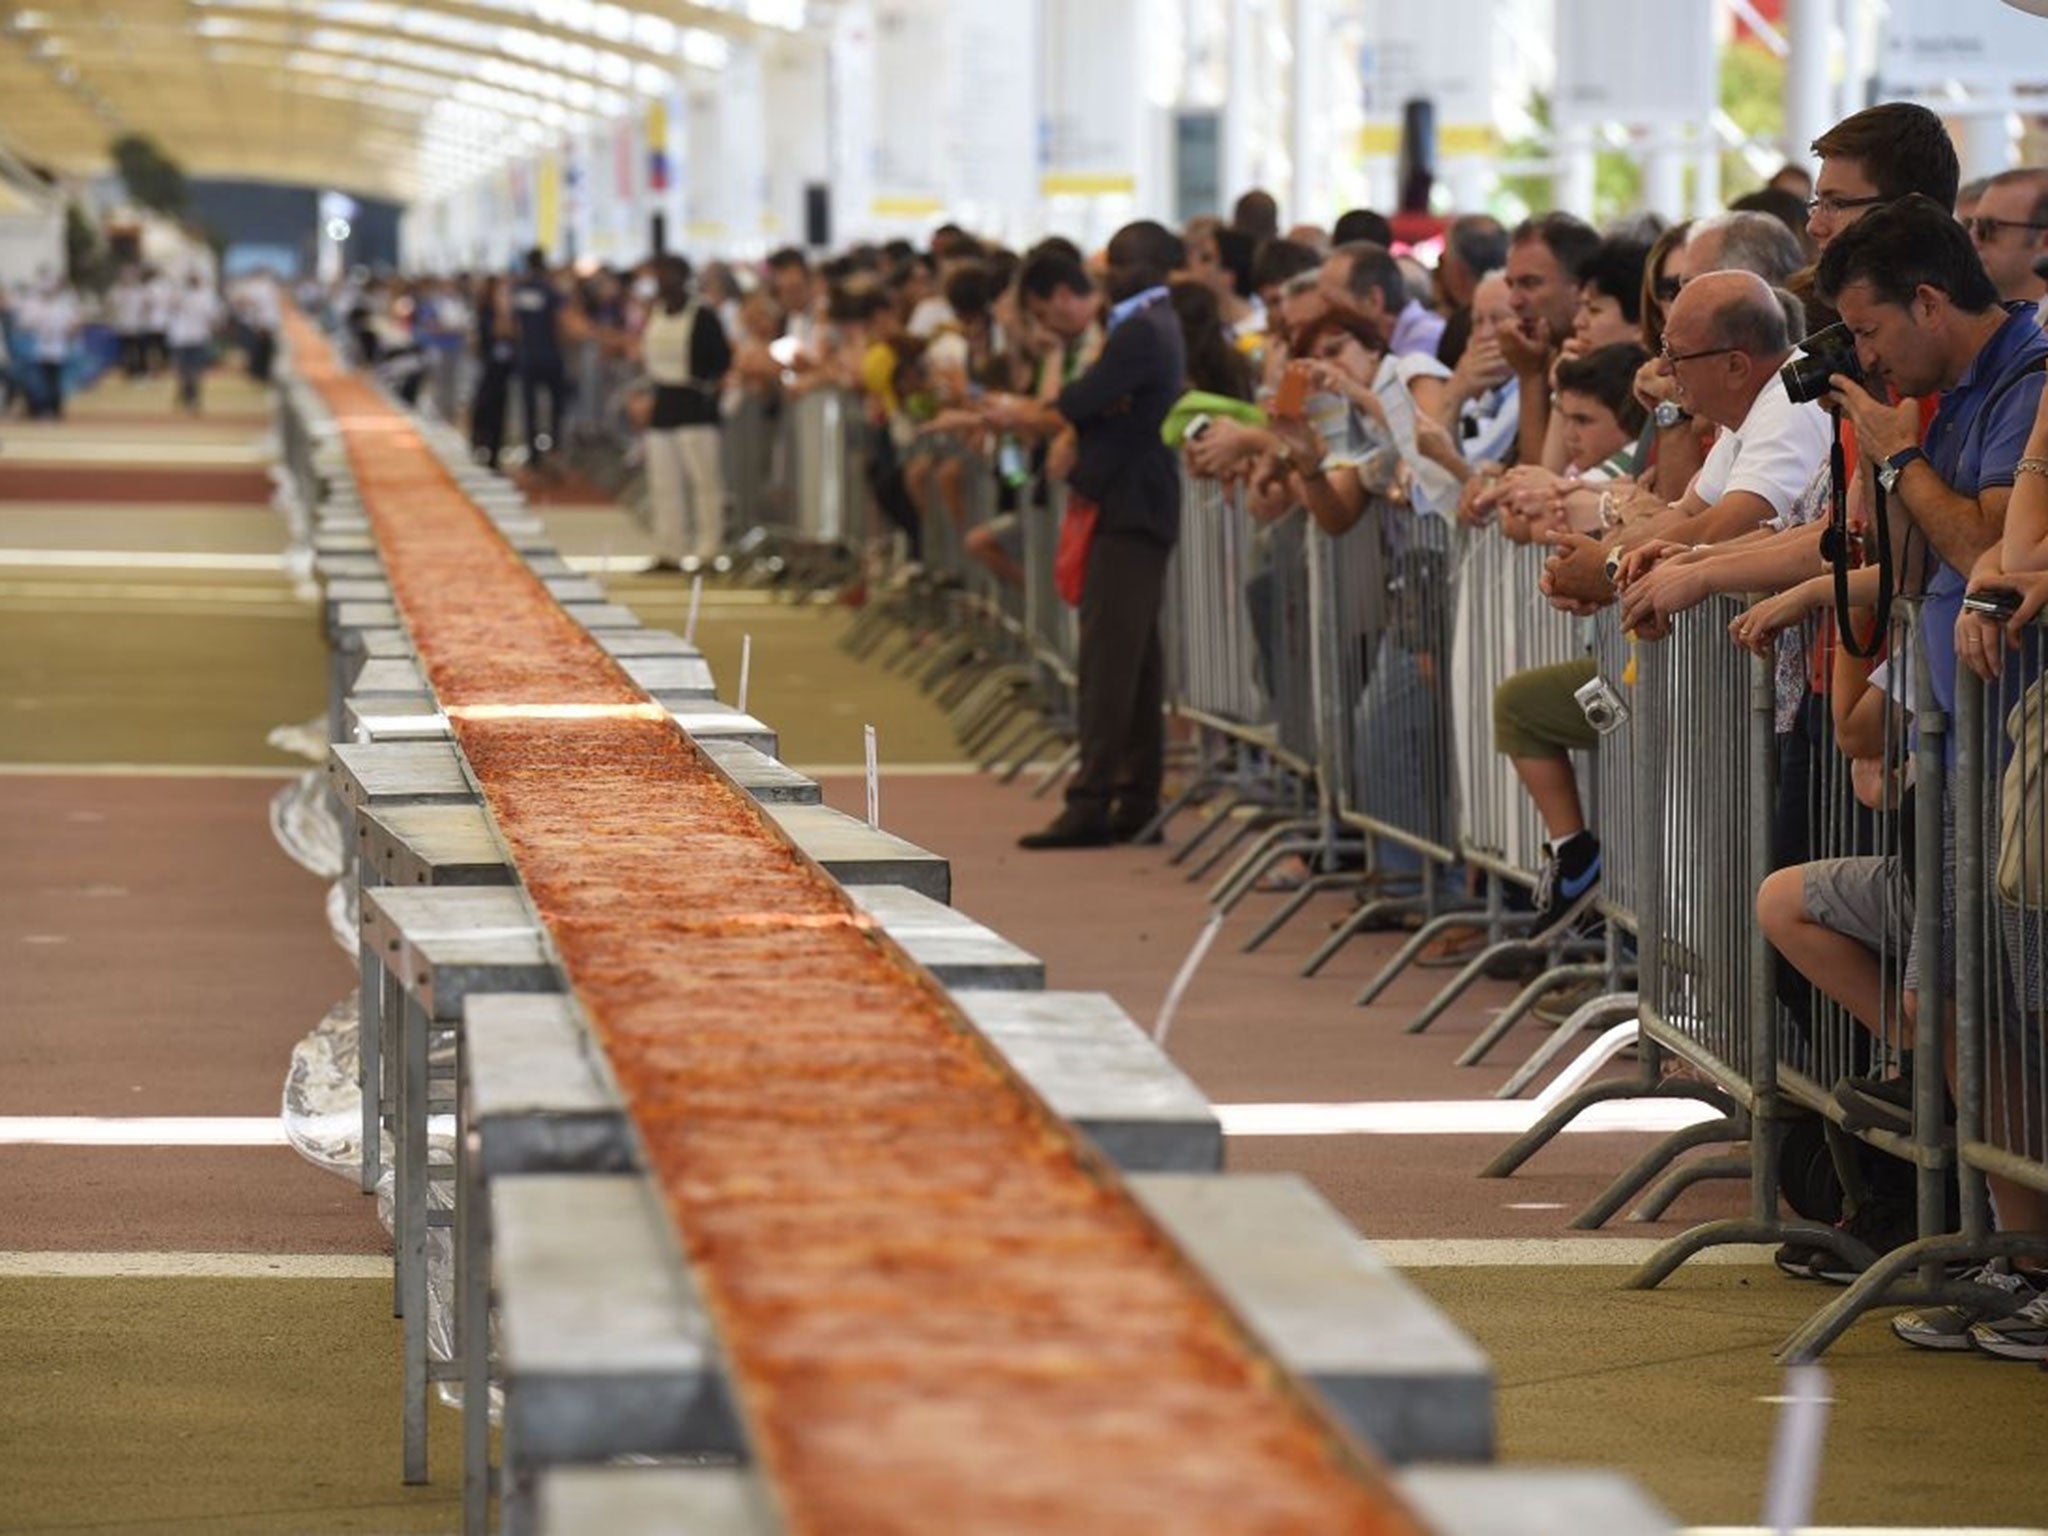 The longest pizza in the world at the Expo Milano 2015